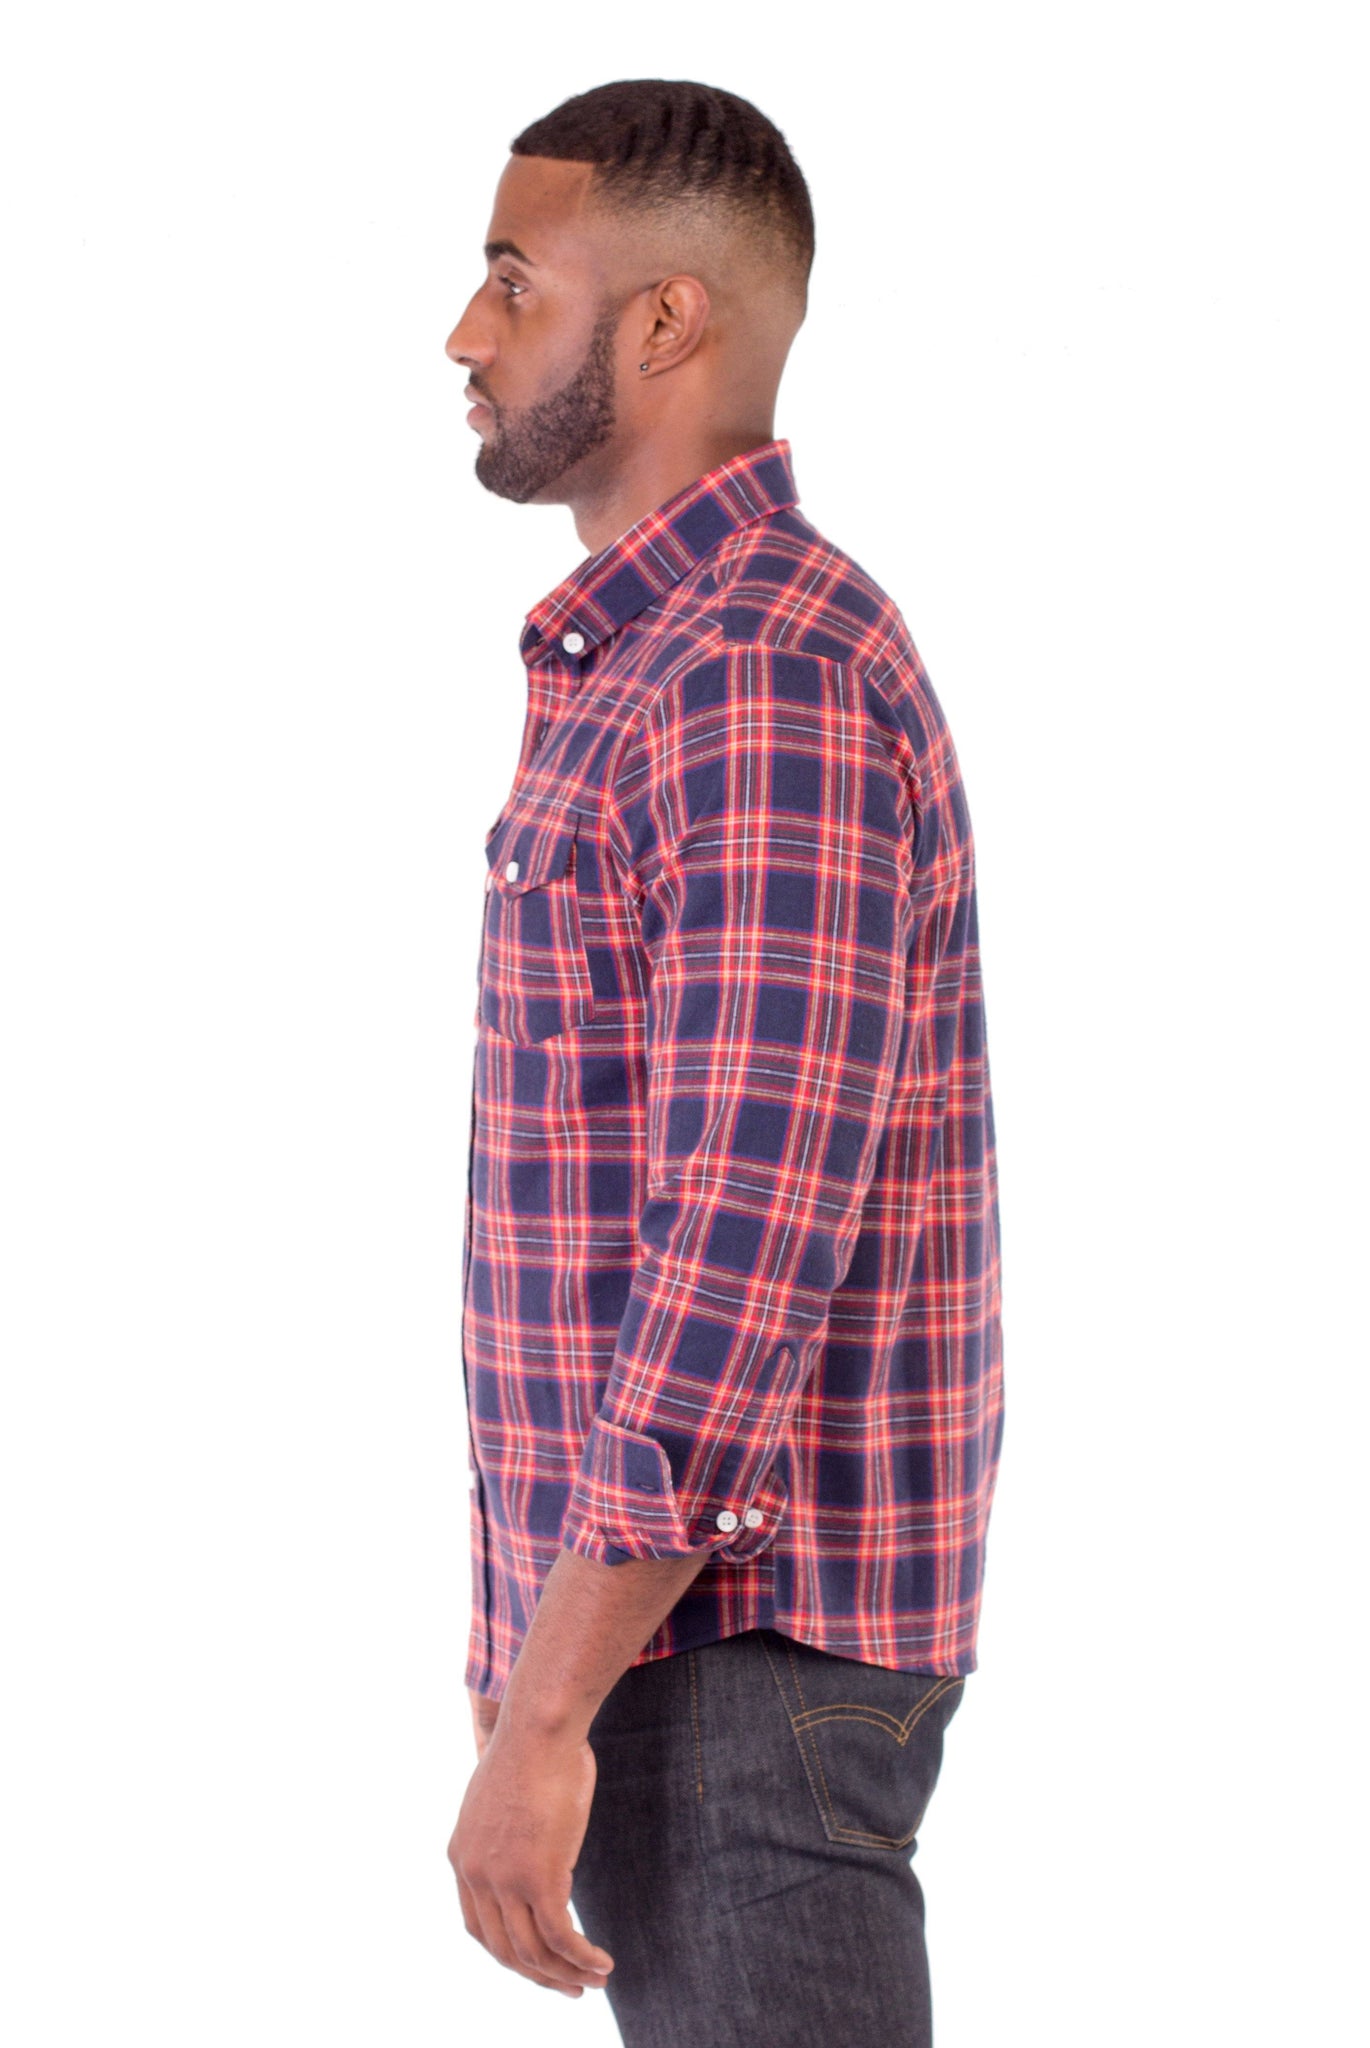 CHARLIE RED/BLUE PLAID SHIRT | Poor Little Rich Boy Clothing